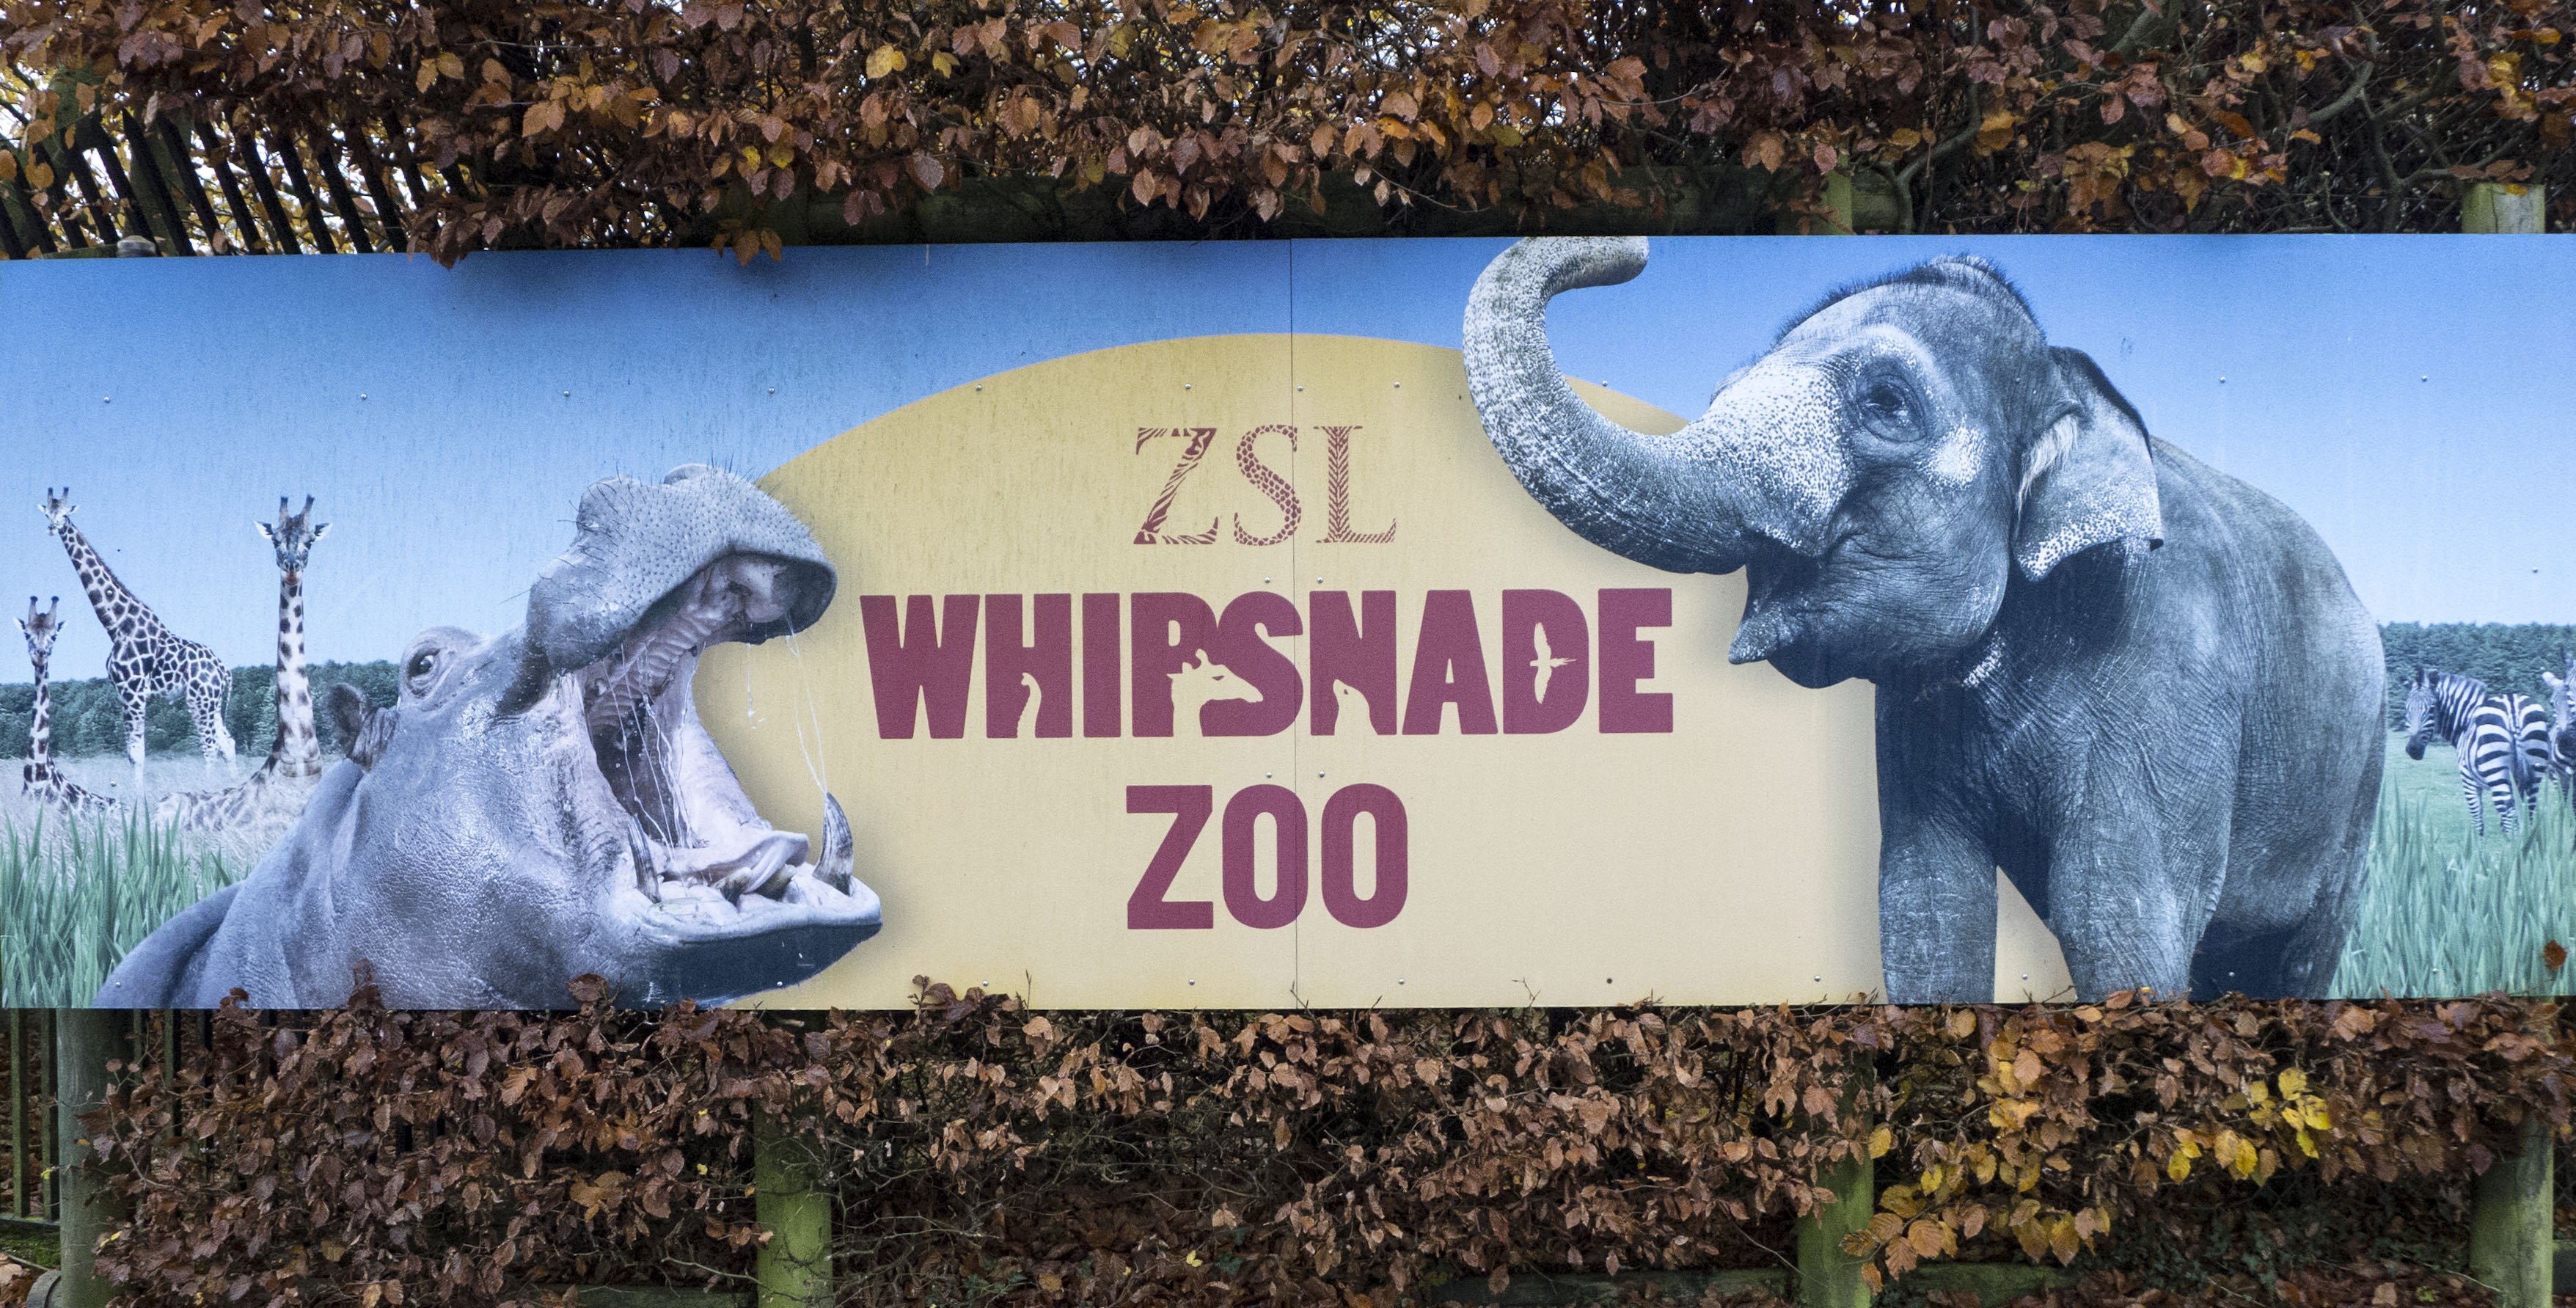 Whipsnade Zoo is the largest zoo and safari park in Great Britain